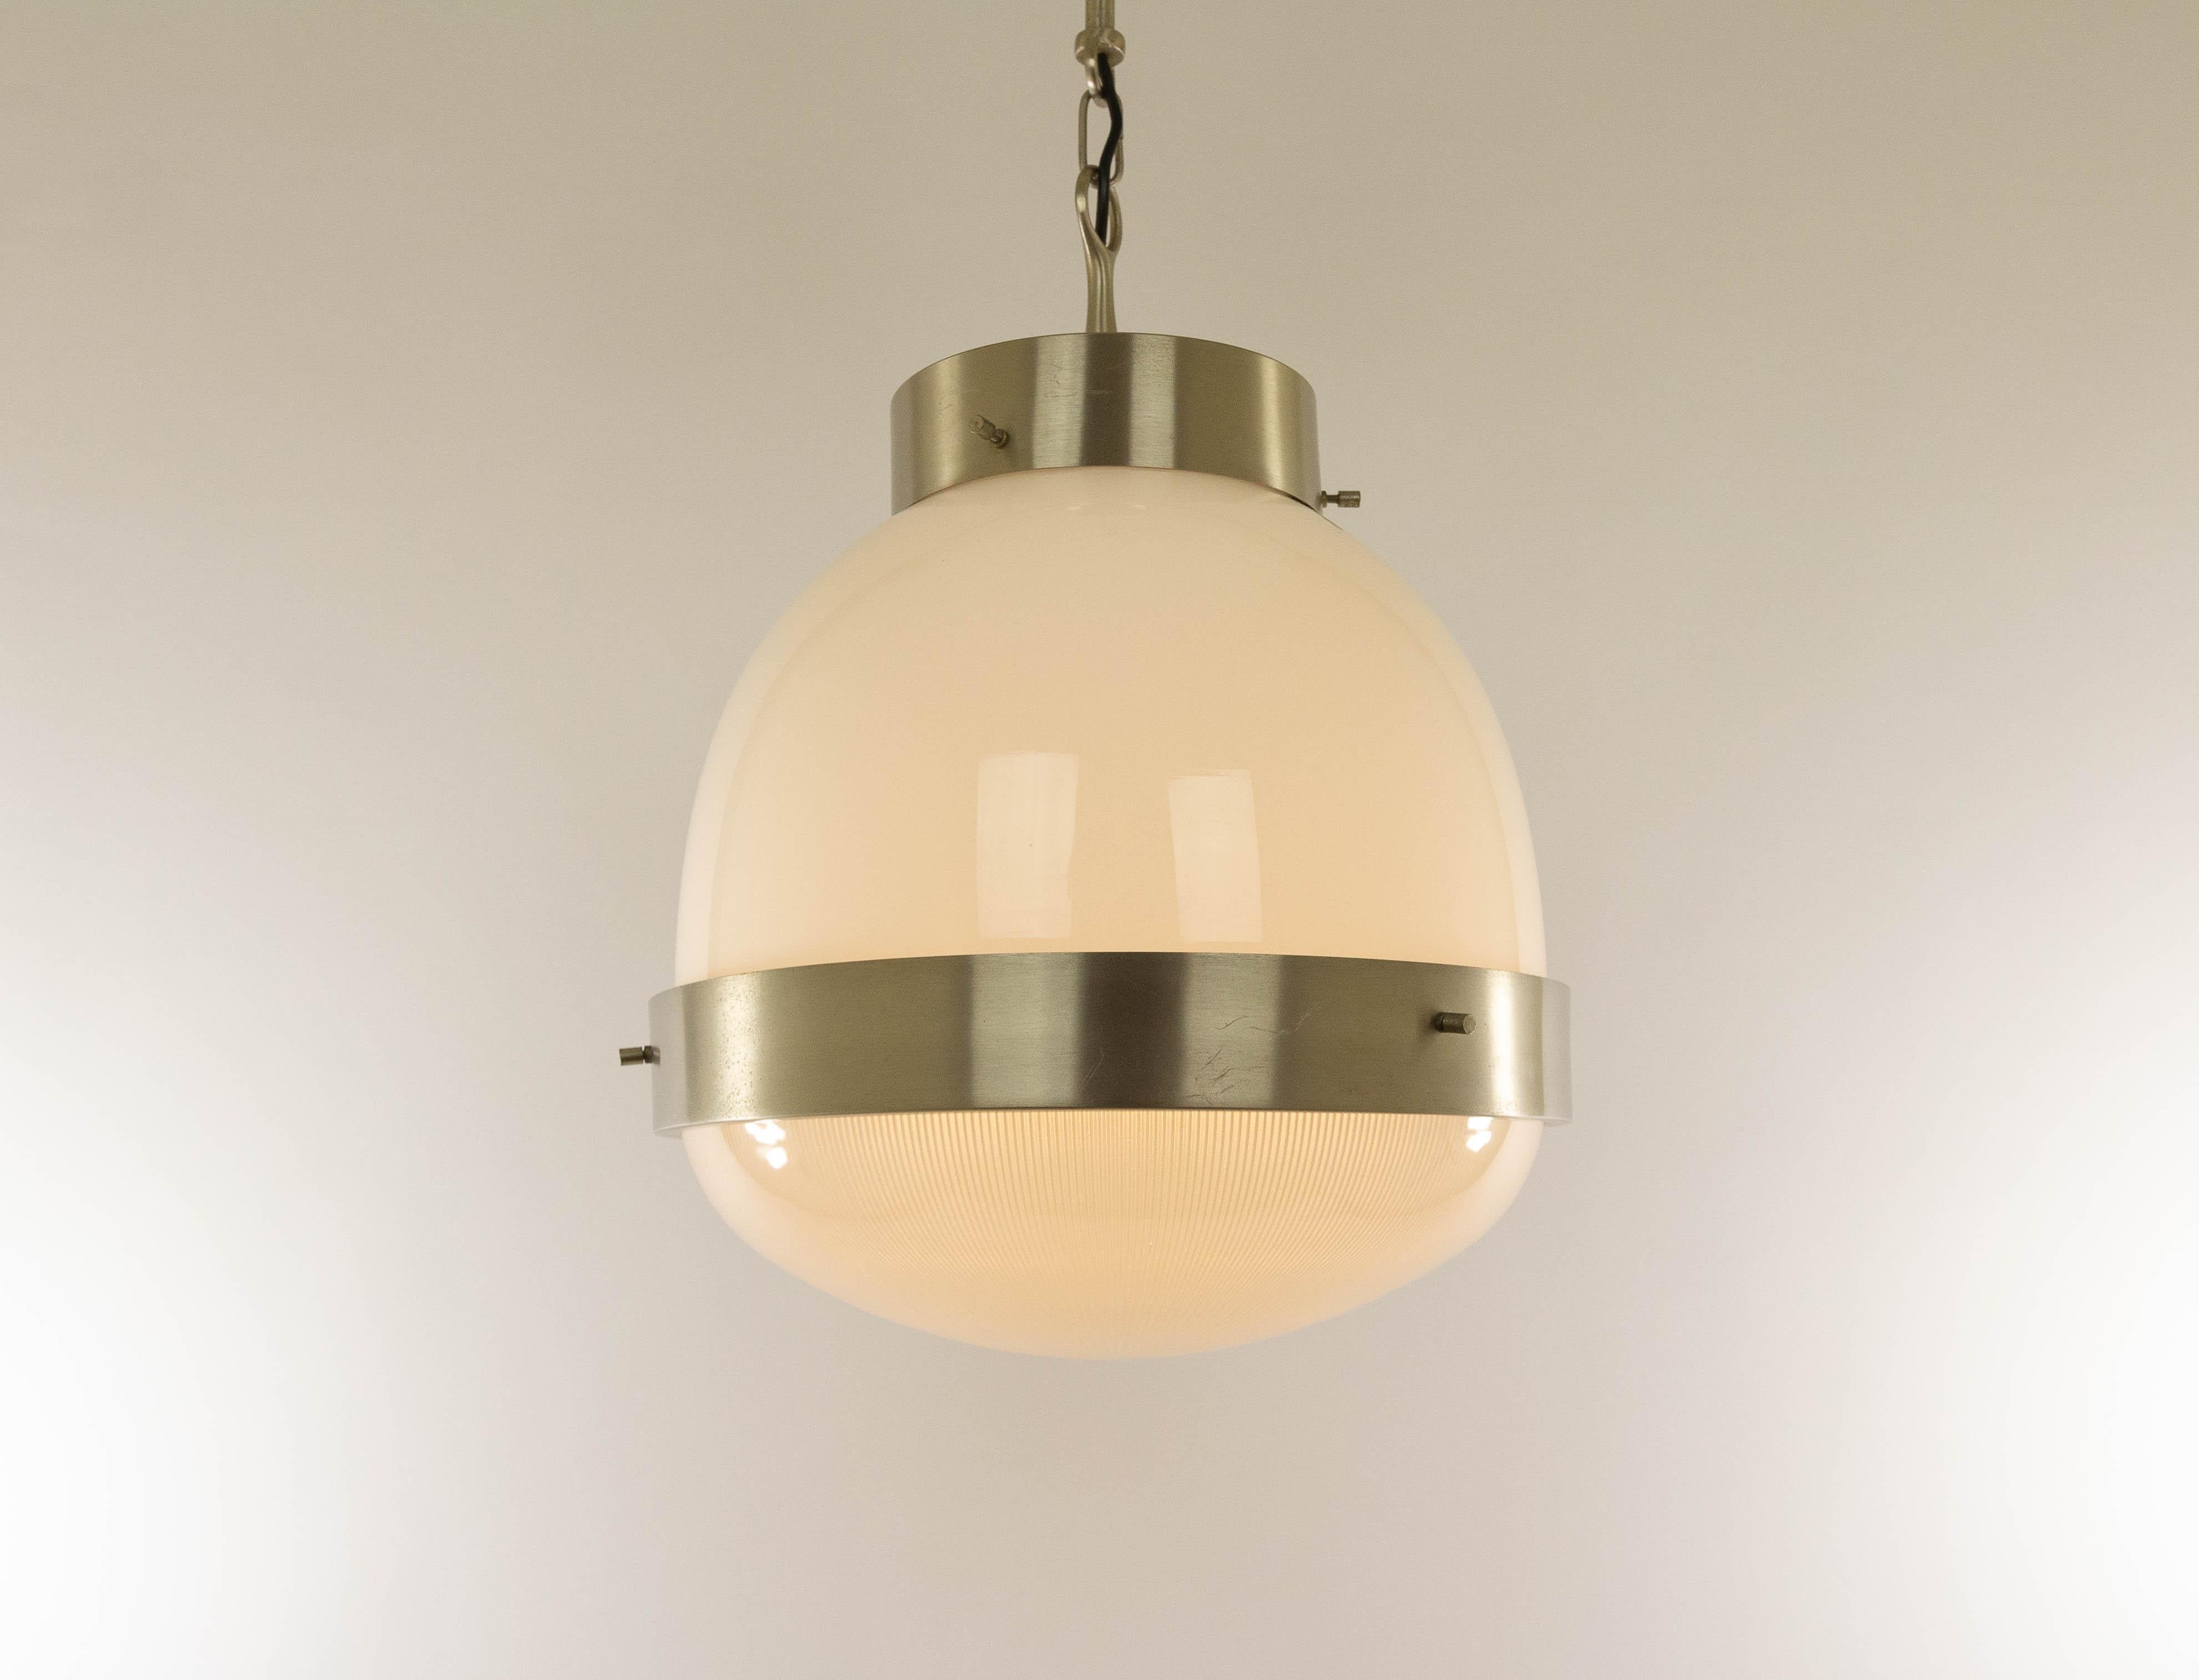 Mid-Century Modern Delta Glass and Nickel Pendant by Sergio Mazza for Artemide, 1960s For Sale